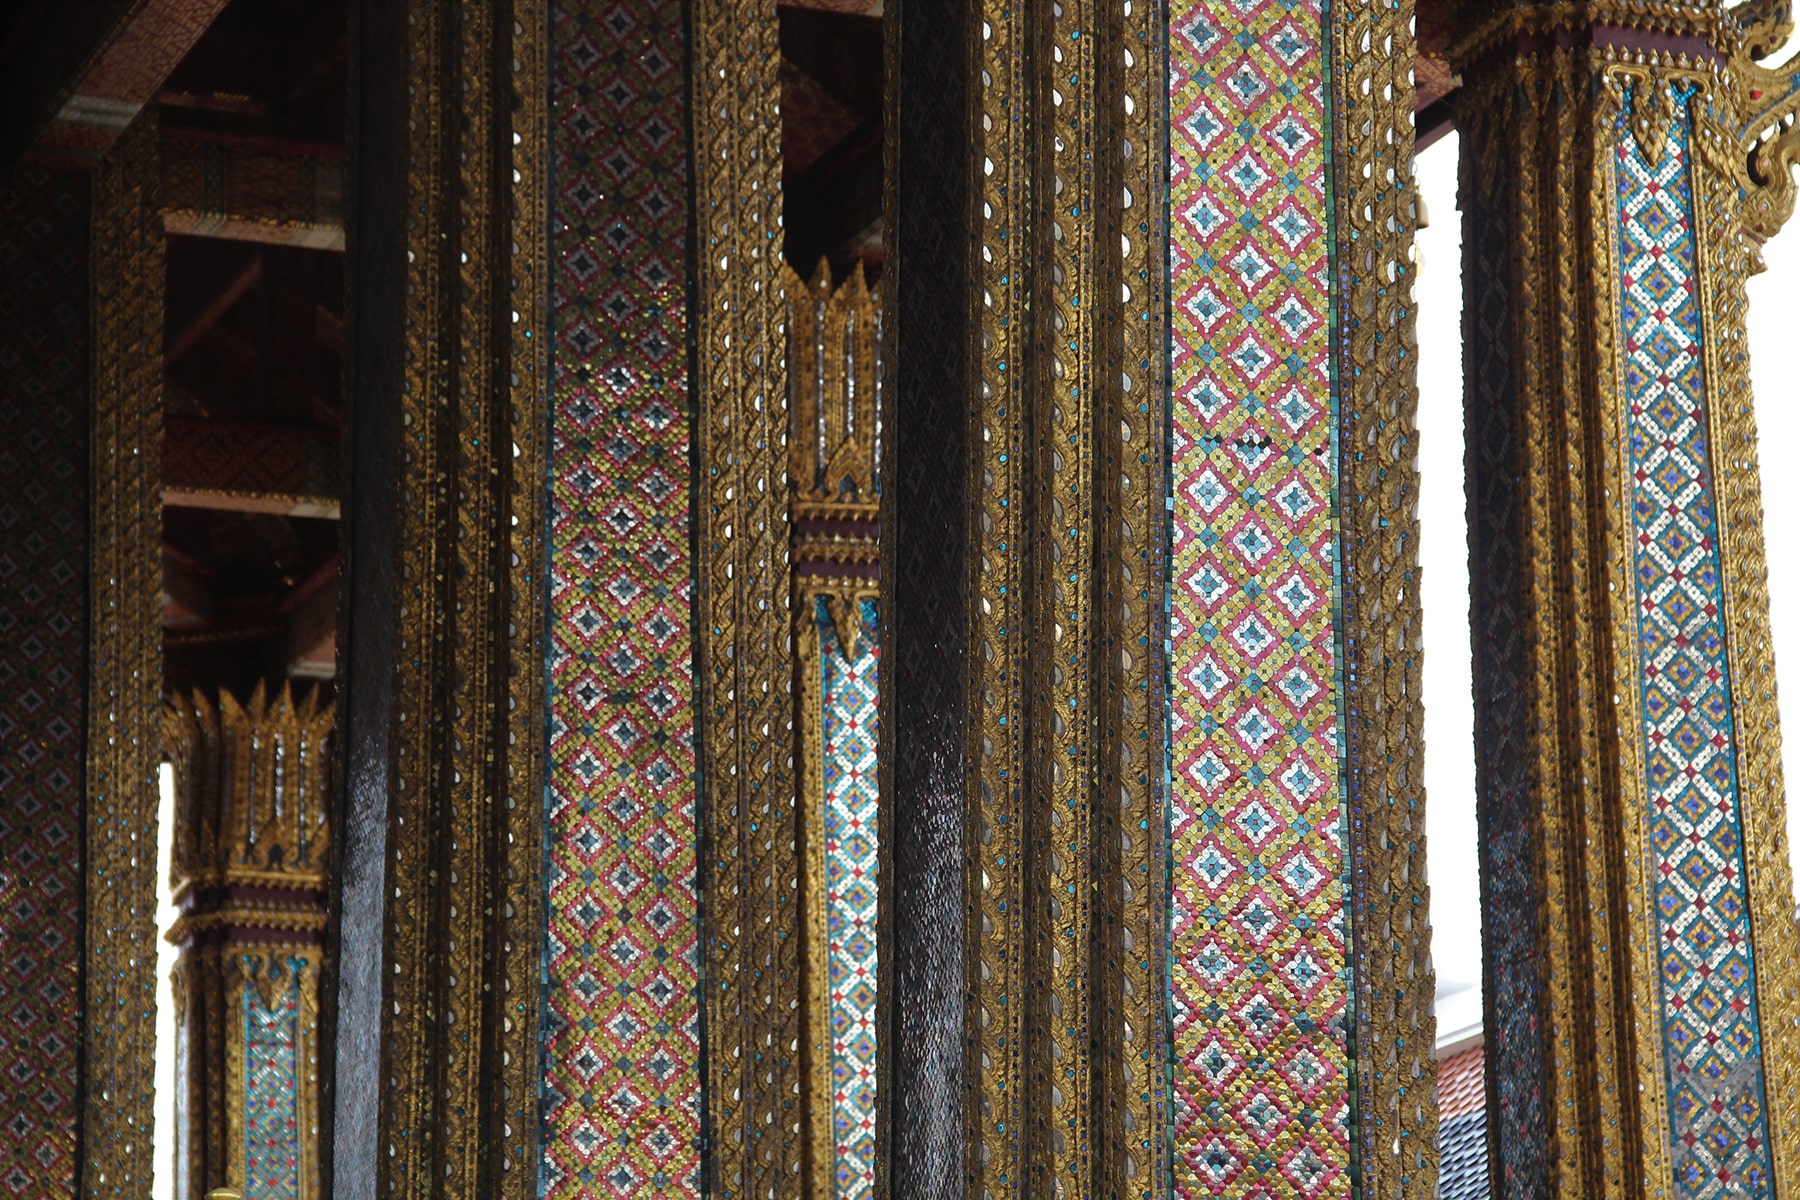 Decorated columns with precious stones in Bangkok Grand Palace